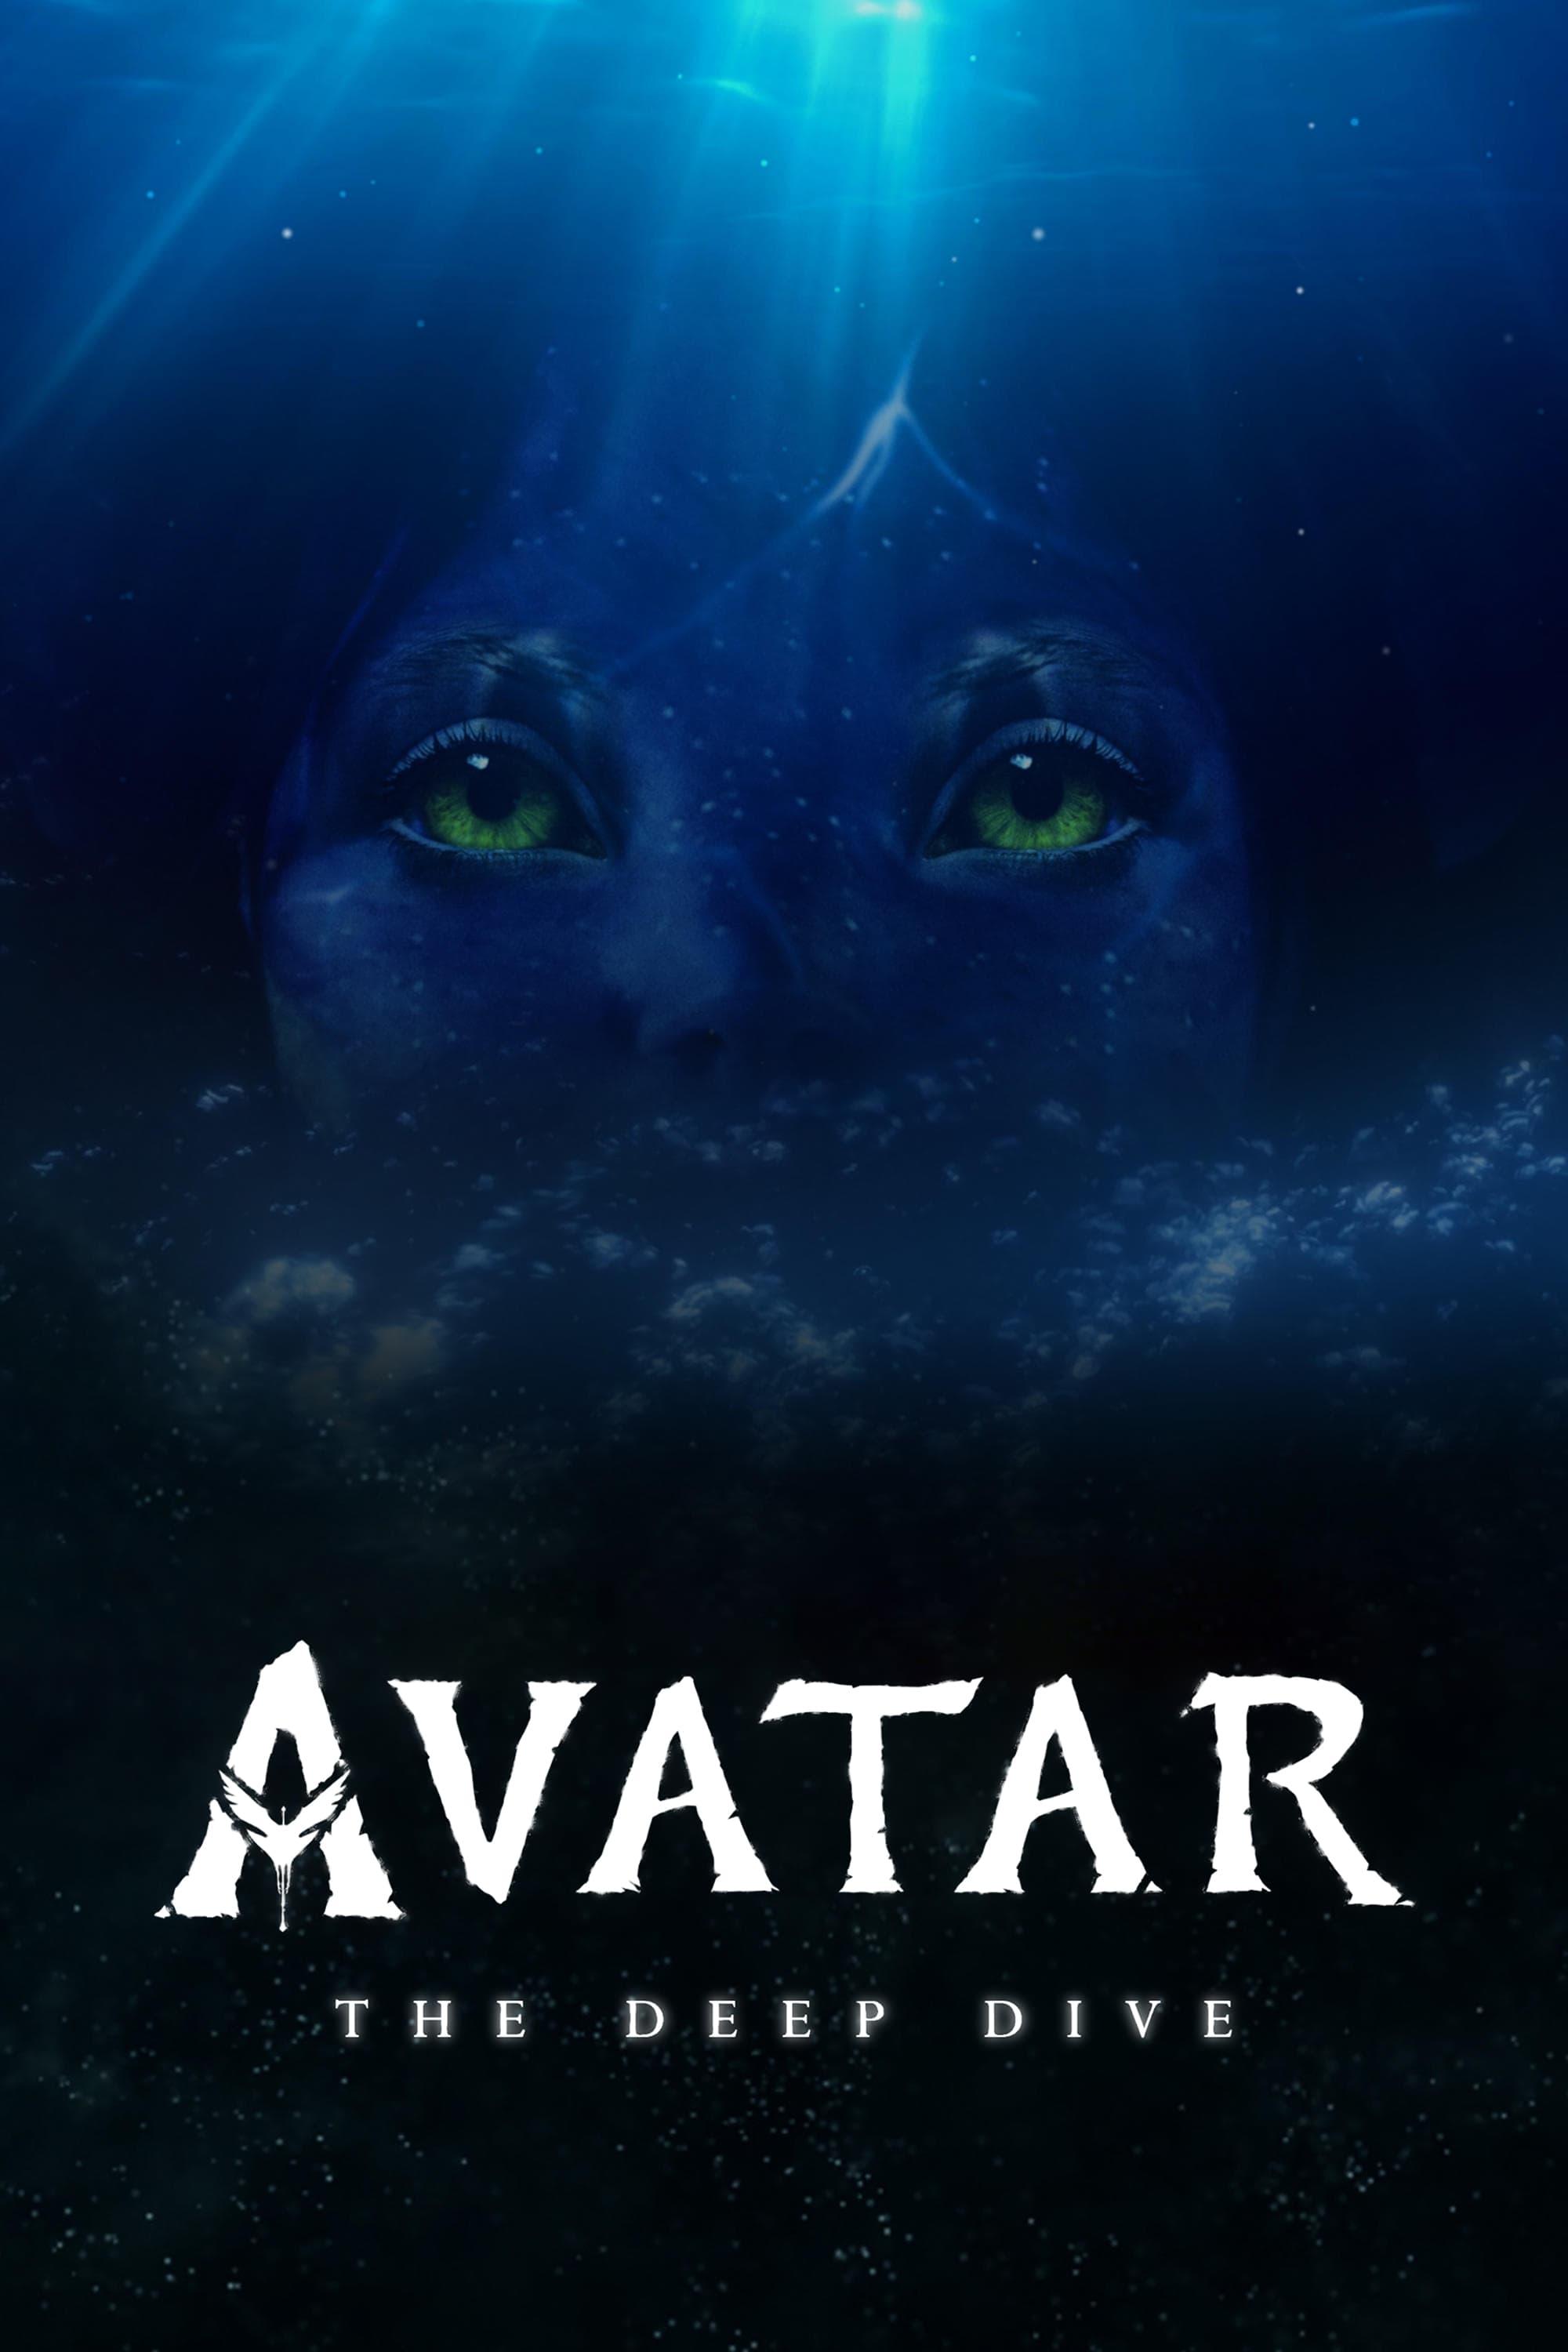 Avatar: The Deep Dive - A Special Edition of 20/20 poster